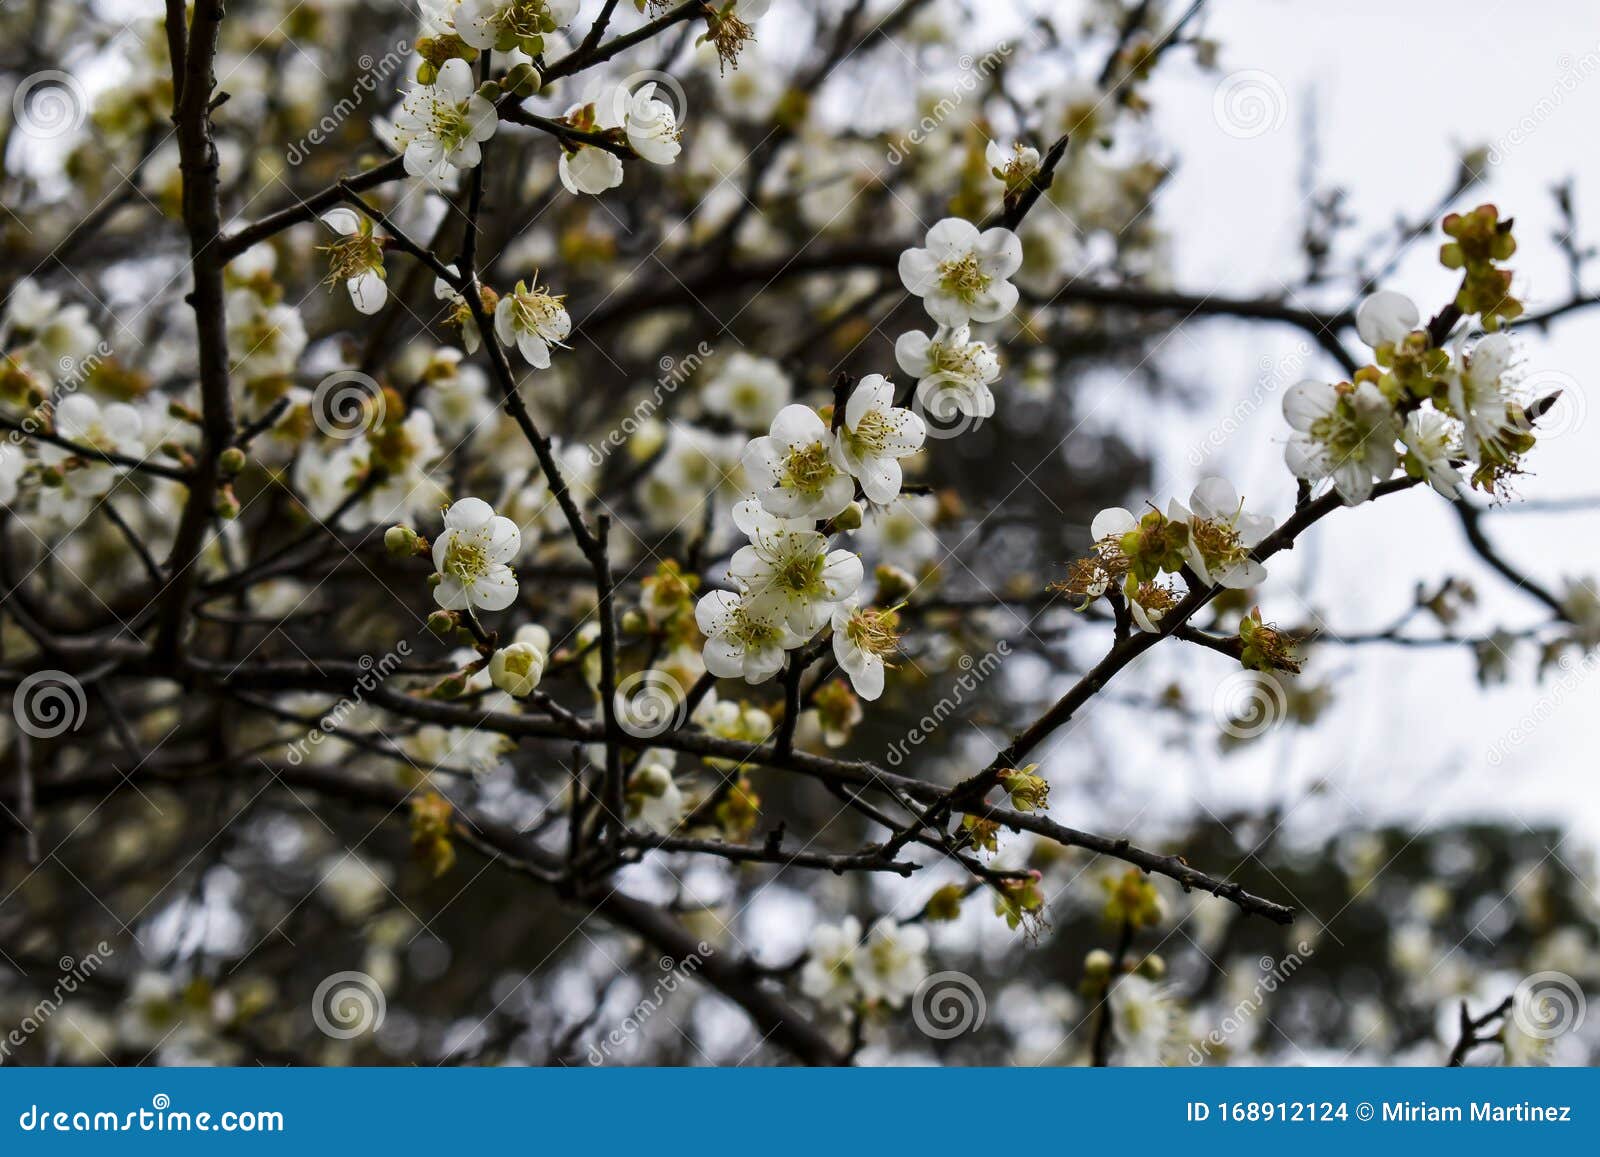 white flowers of an almond tree.